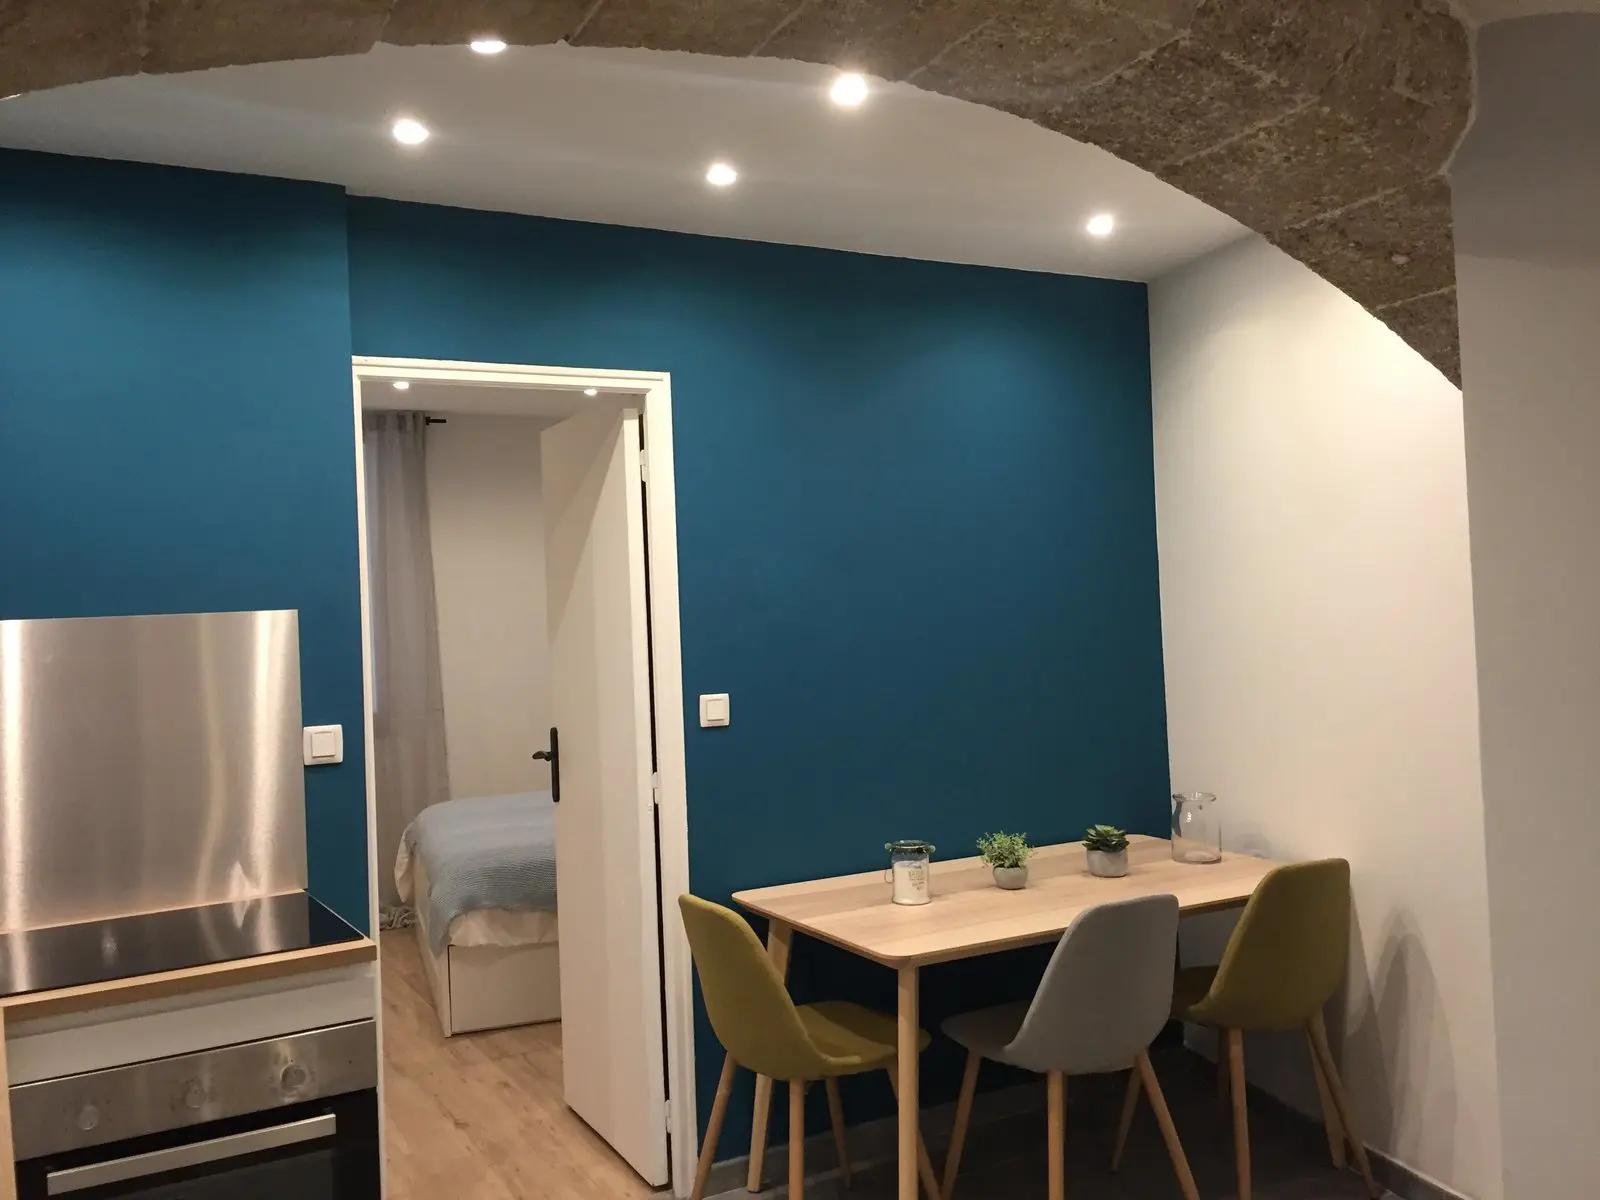 Space Warm, modern apartment in Béziers - 2